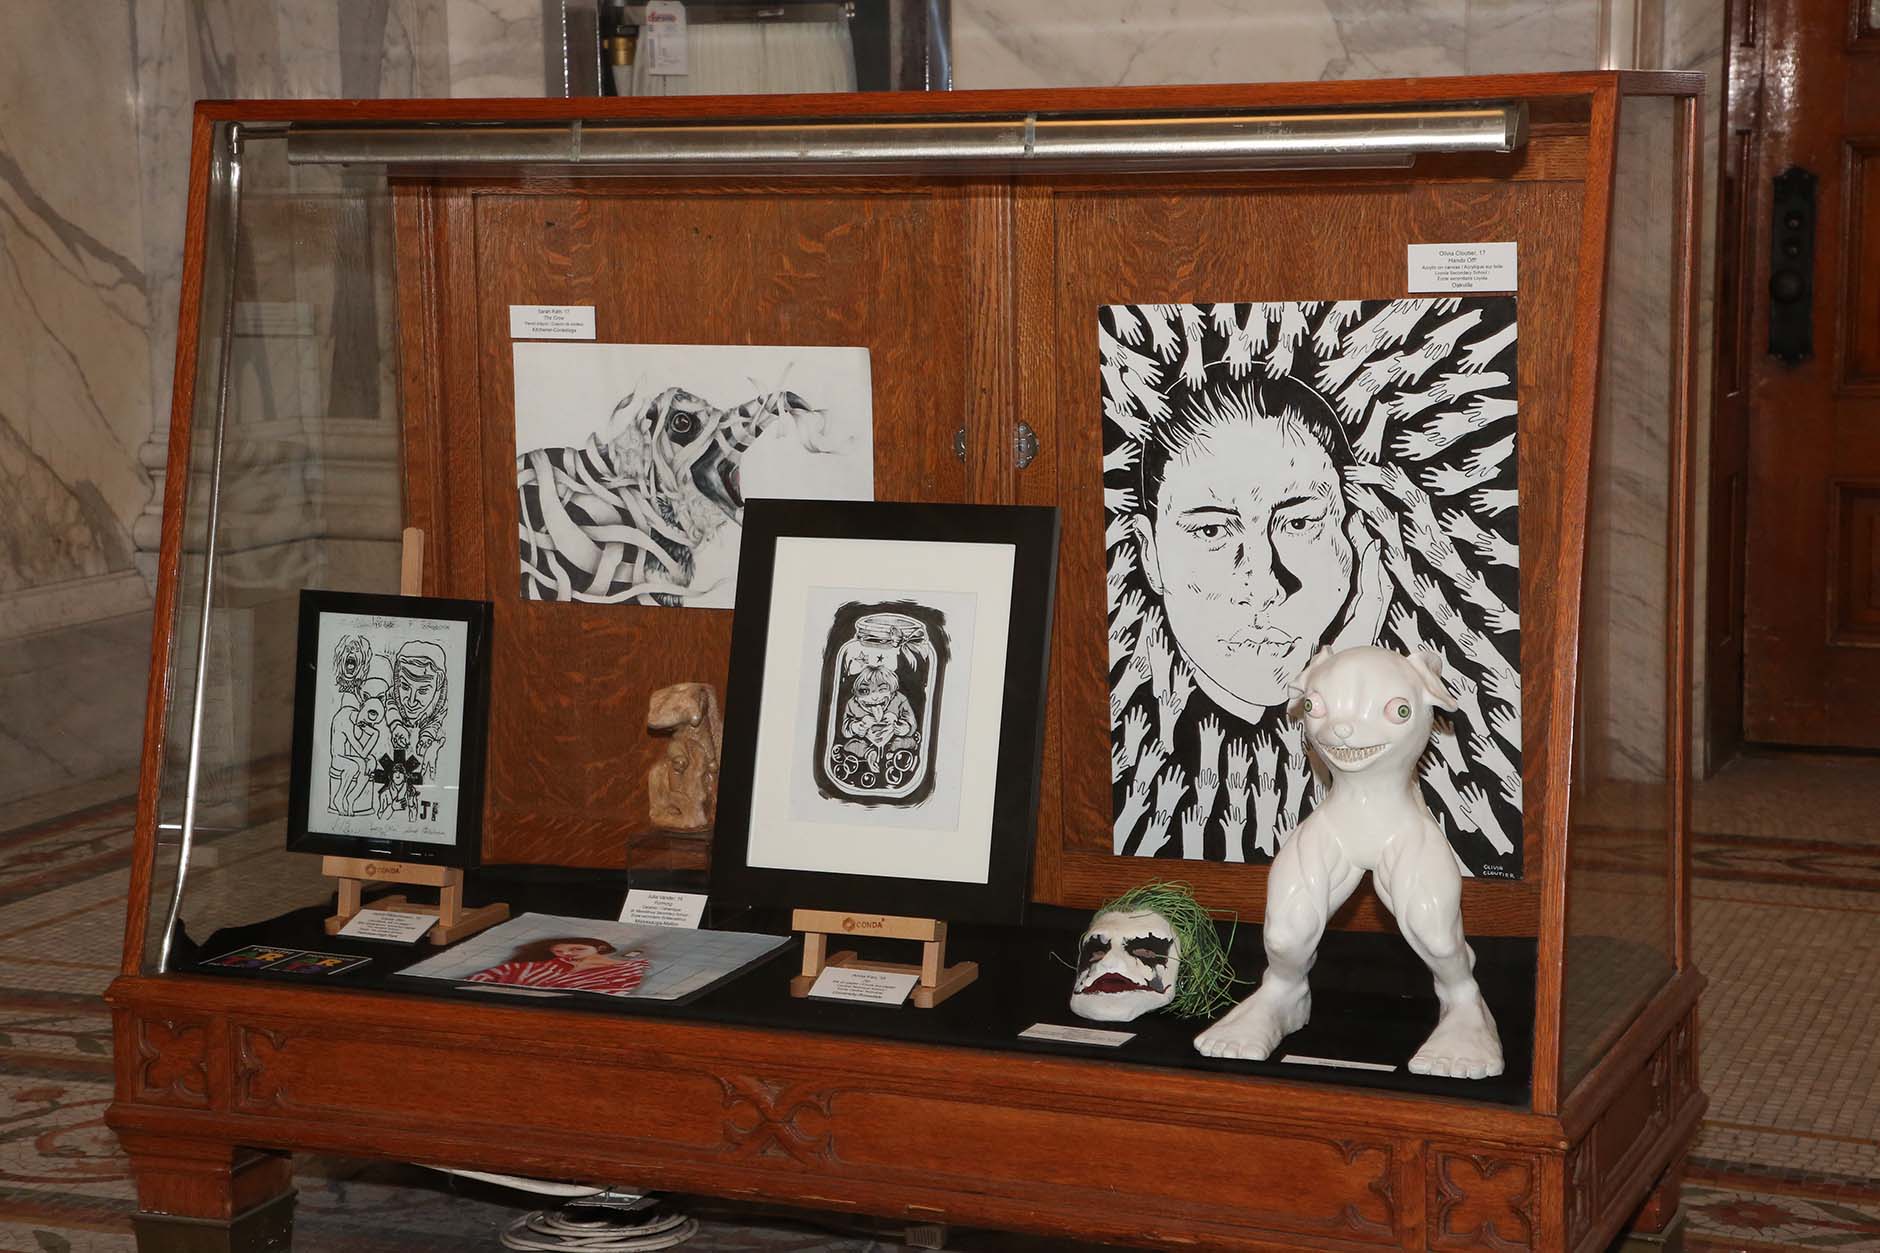 Drawings and sculptures by student artists in the 2019 Youth Arts Program